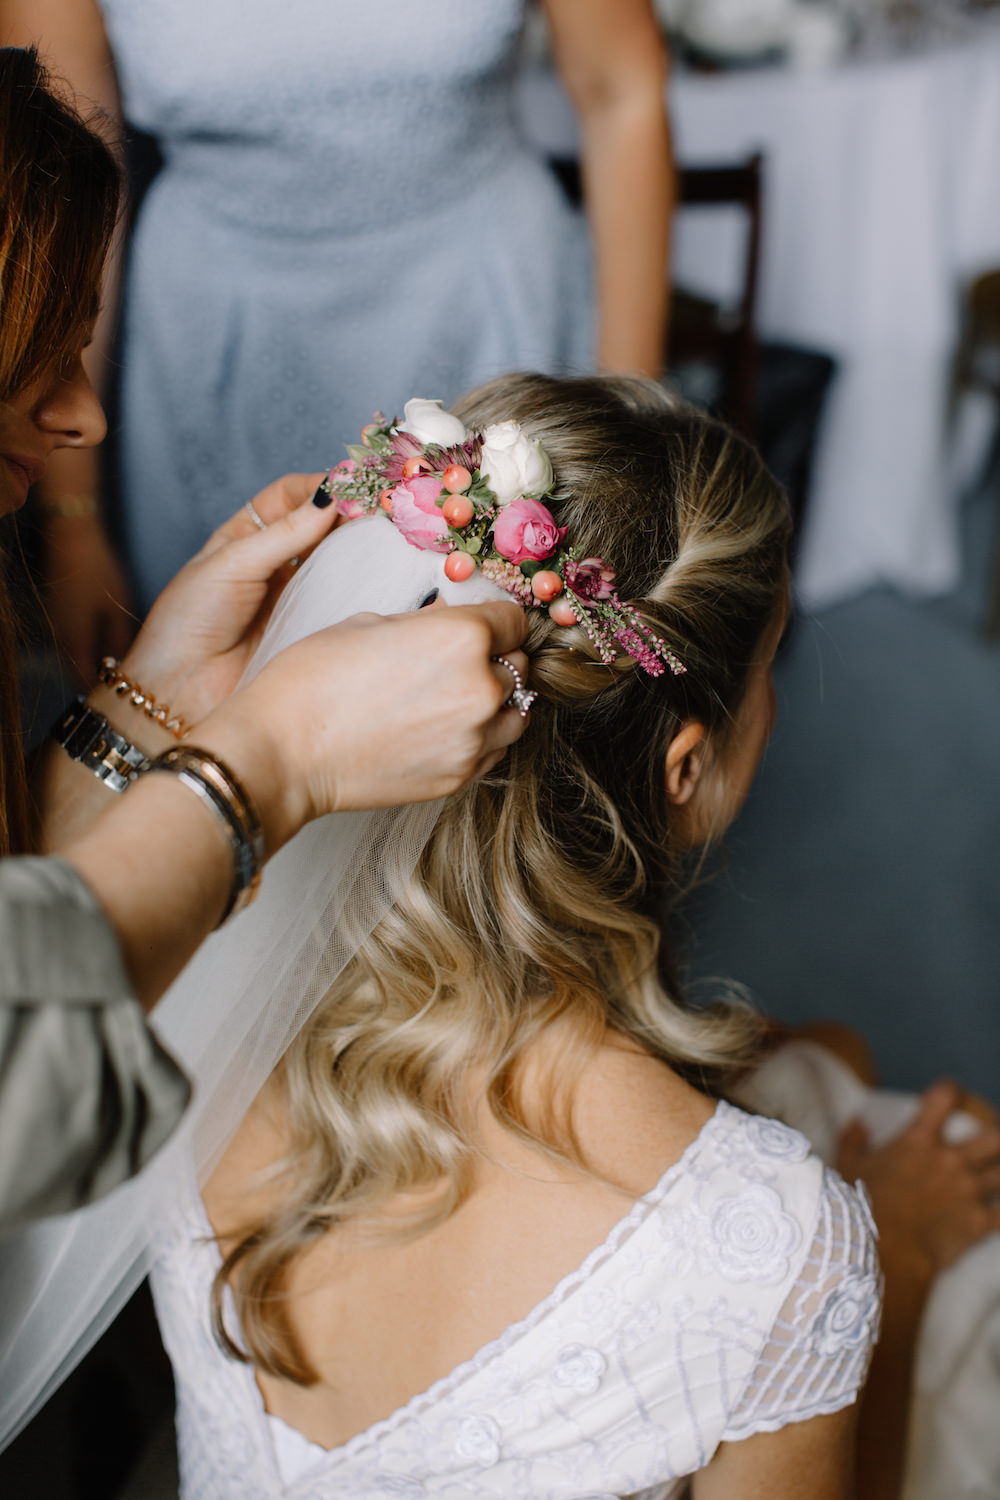 Romantic half up half down hairstyle with floral piece and veil. // Gorgeous half up half down bridal hairstyle ideas to impress on your wedding day. // mysweetengagement.com